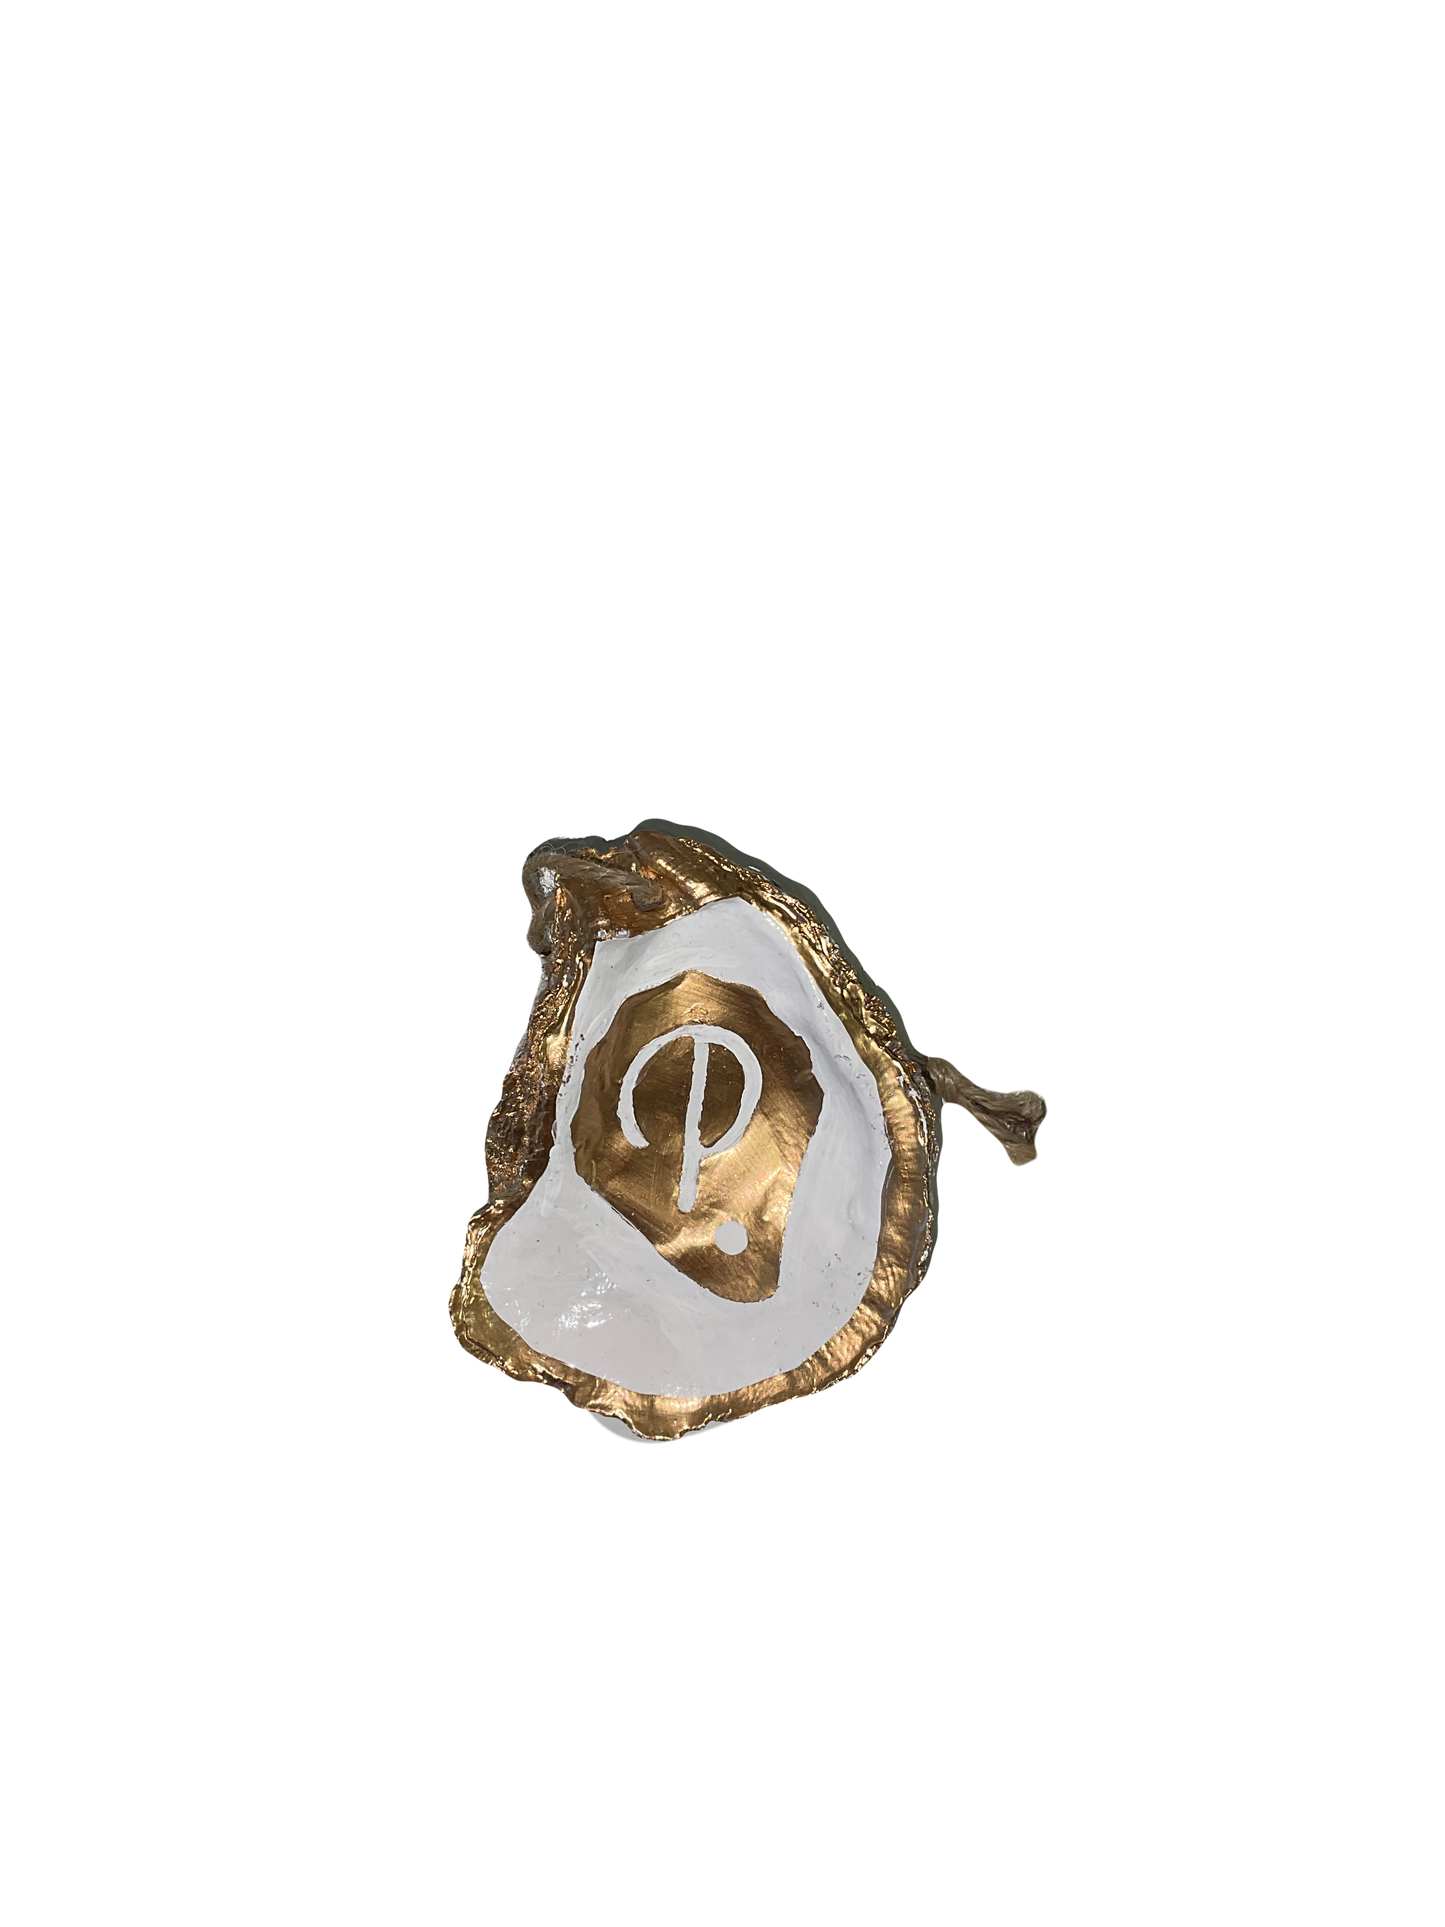 Pass Roots Oyster Shell Ornaments